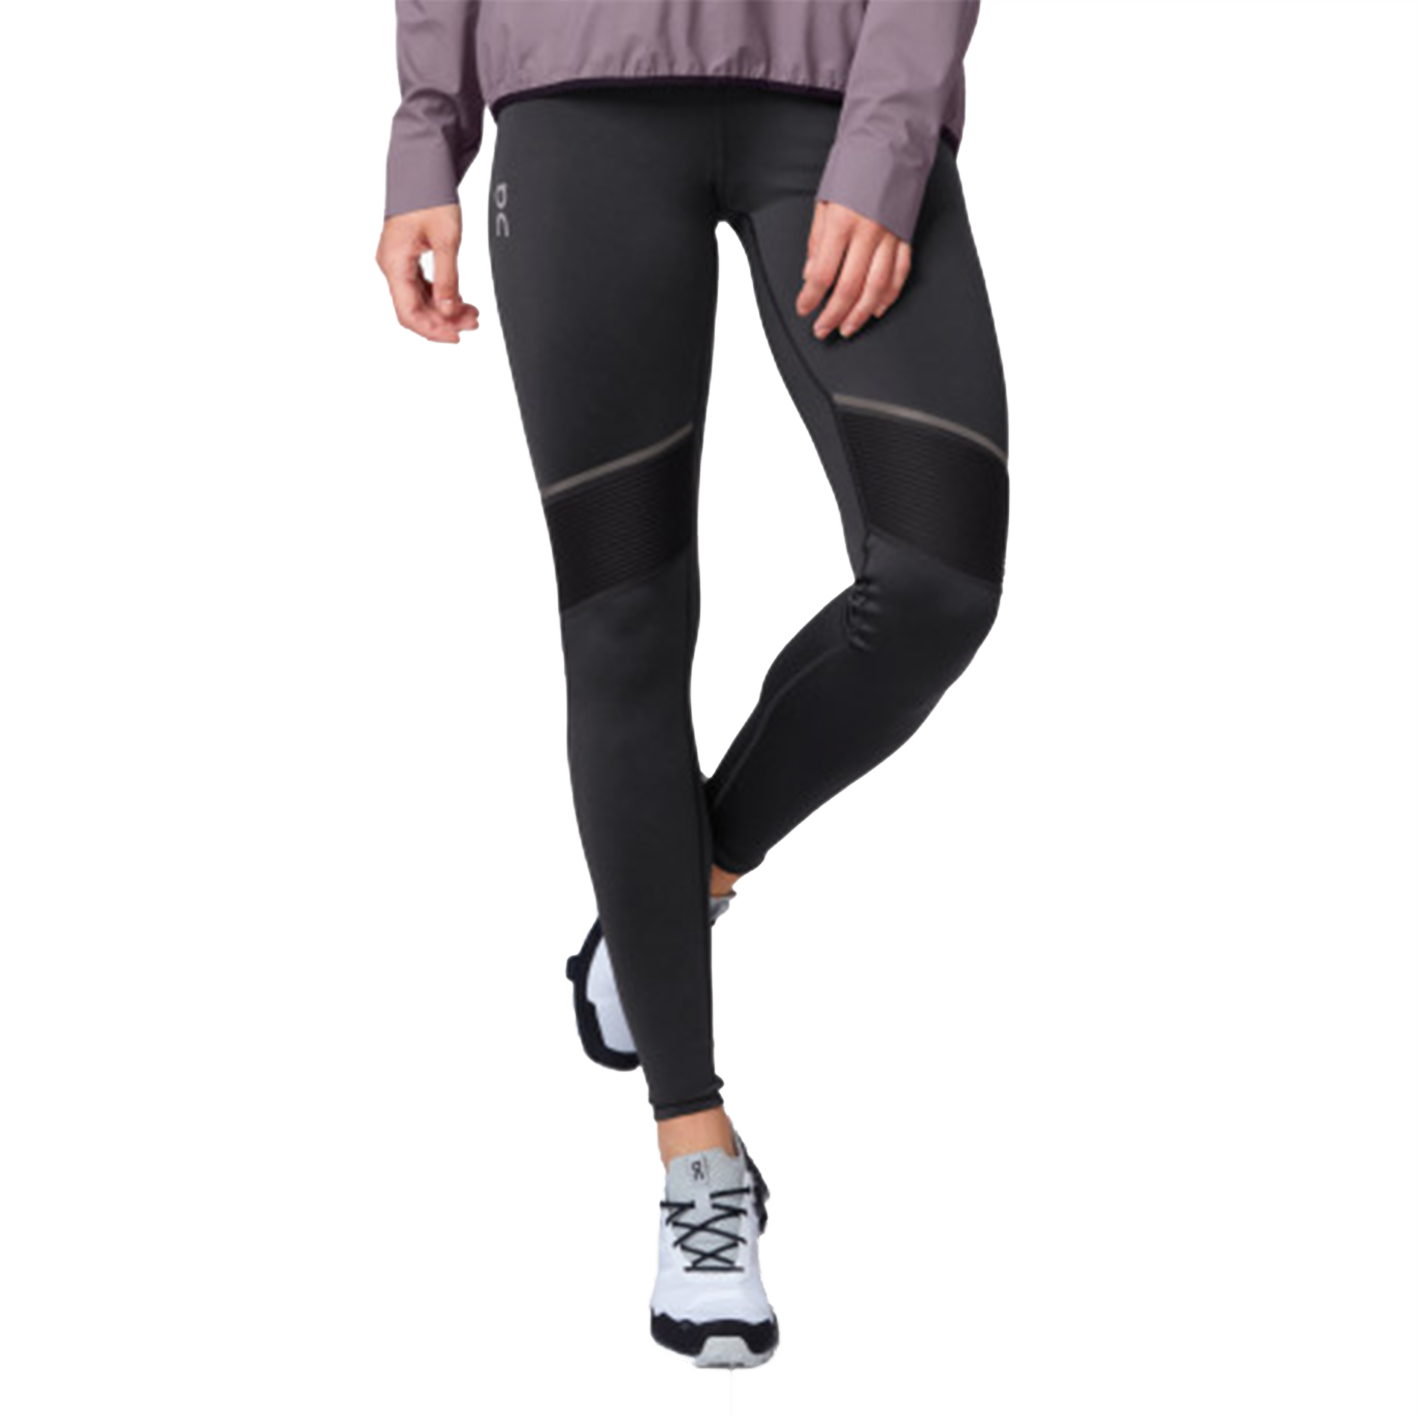 nike women's cold weather running tights